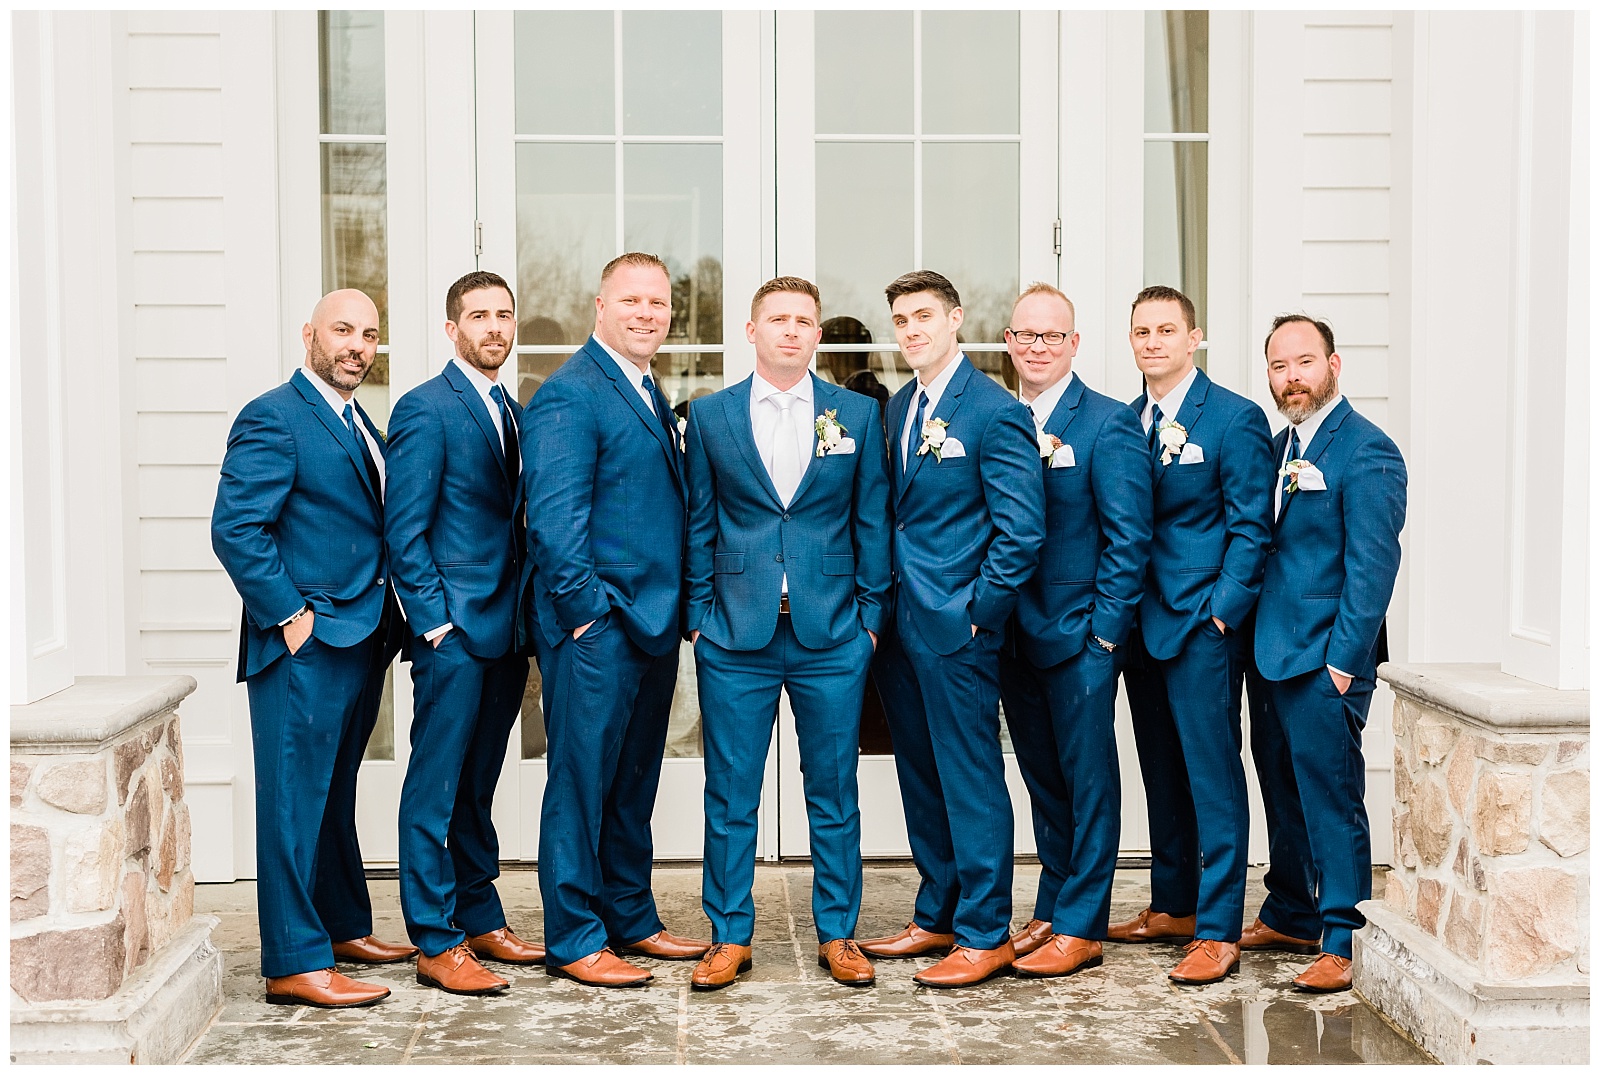 Groomsmen wearing blue suits look at the camera.